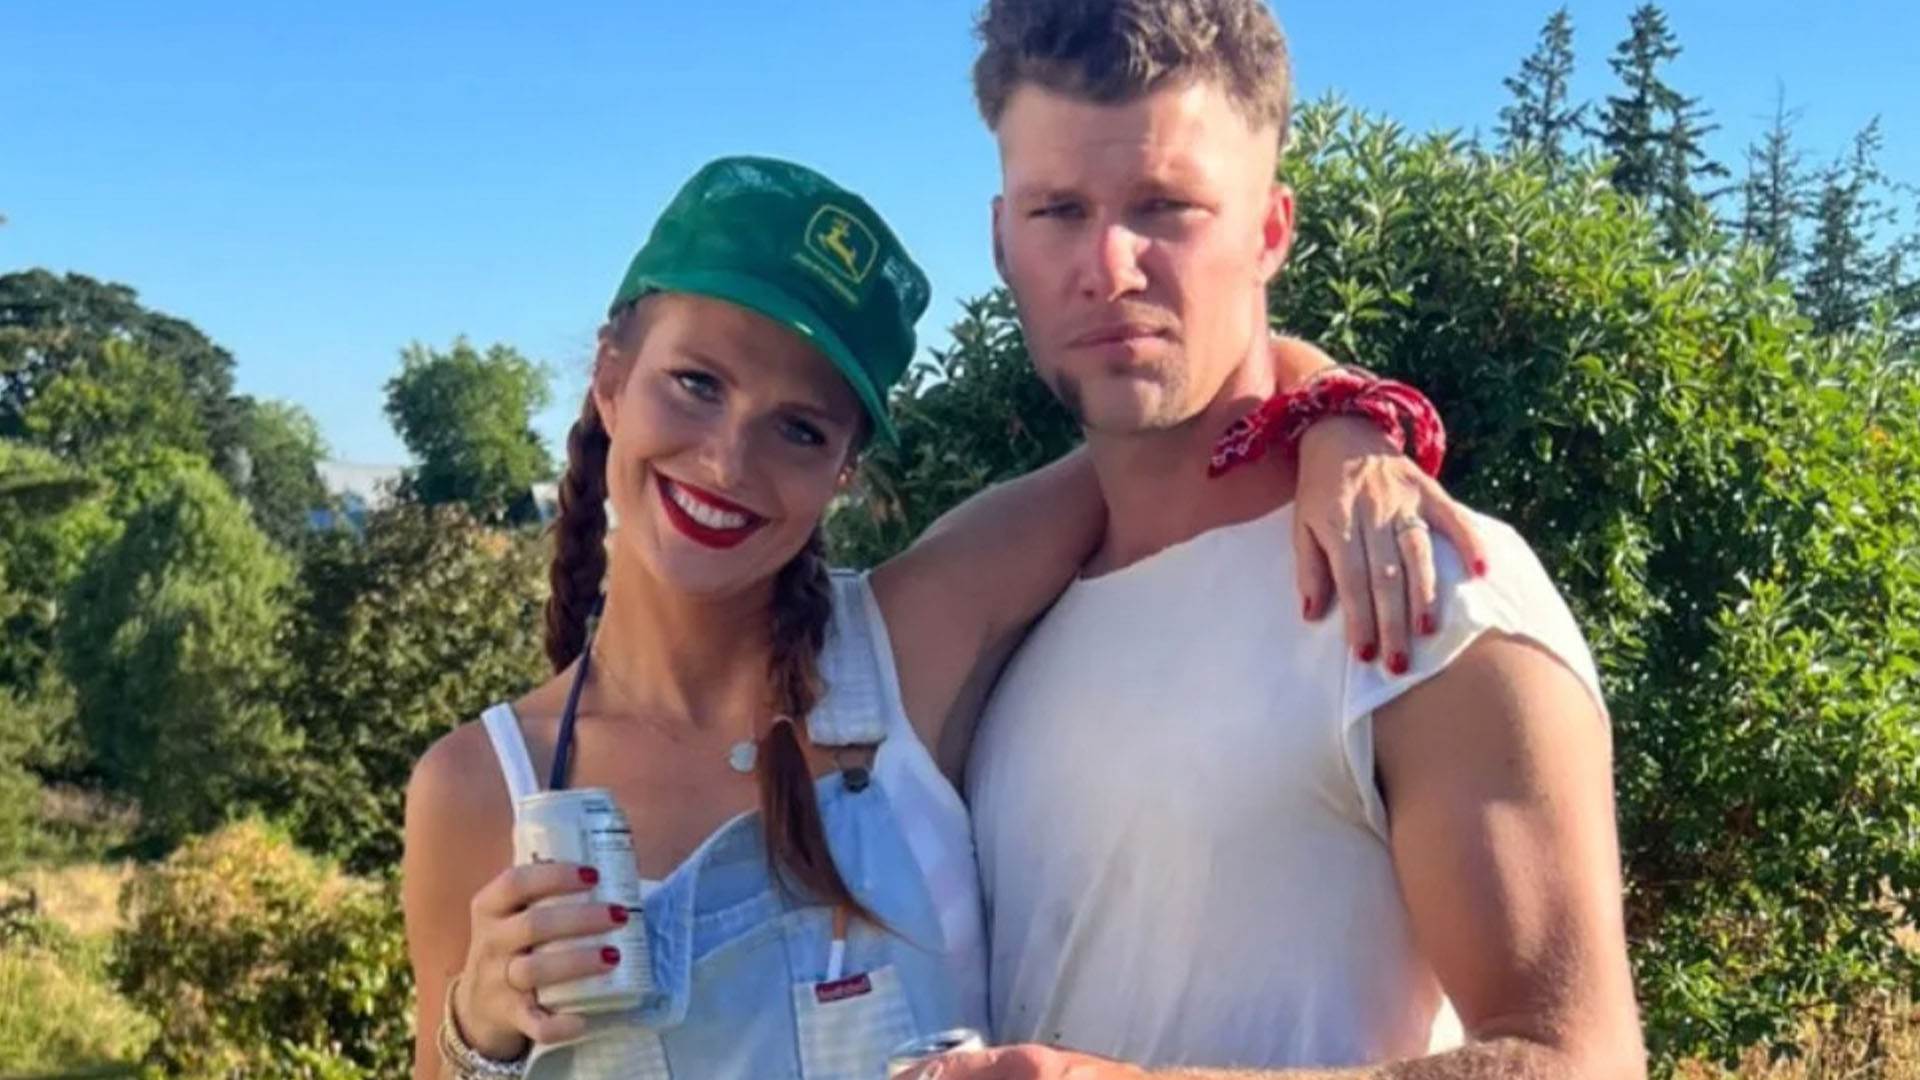 Little People’s Audrey Roloff claps for her fans after her husband Jeremy was slammed over’smoking.’ In a new photo,